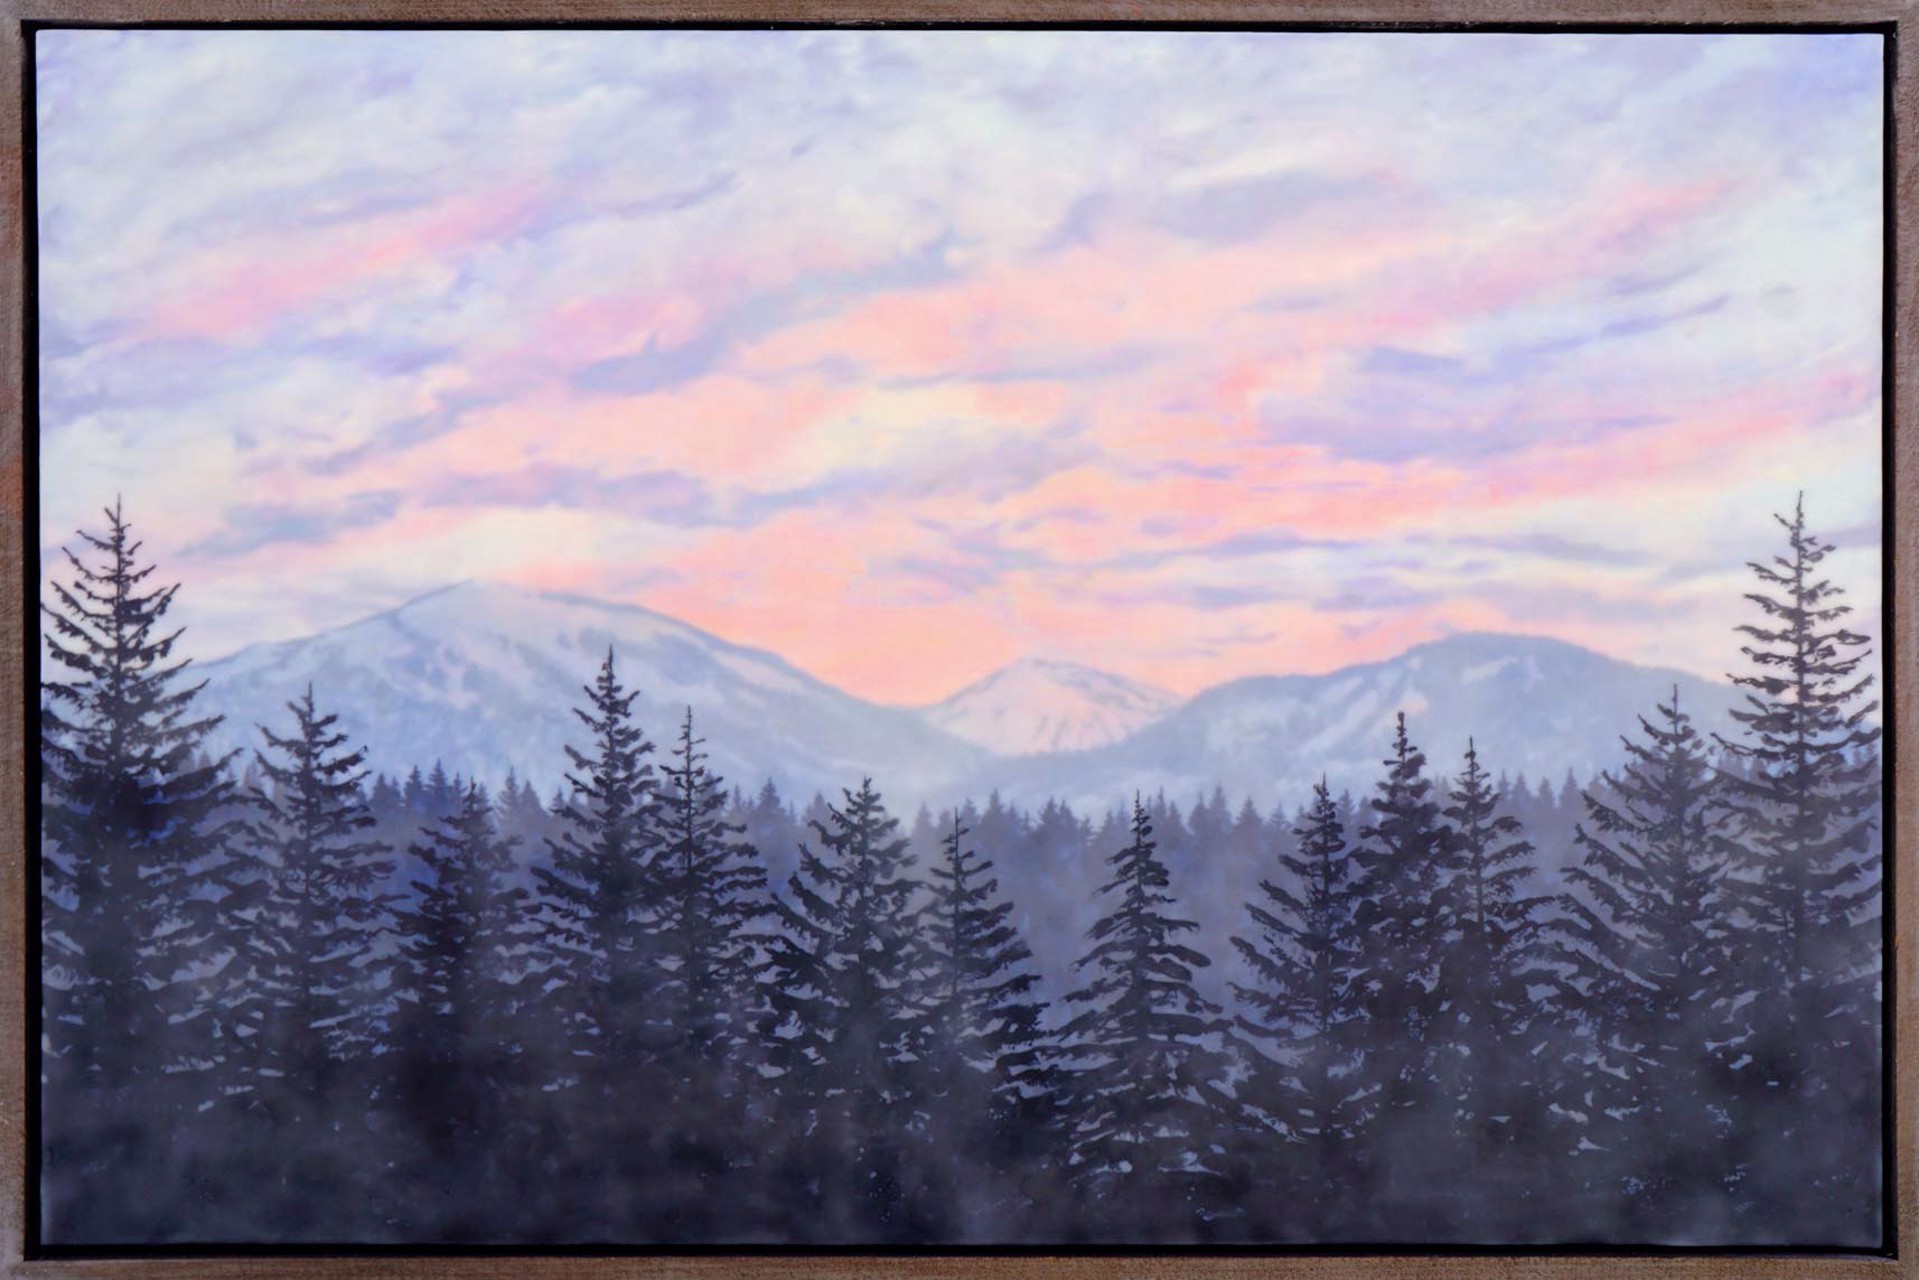 Original Encaustic Painting By Bridgette Meinhold Winter Mountain Landscape With Tall Pines Pink Light From the Sunrise Or Sunset